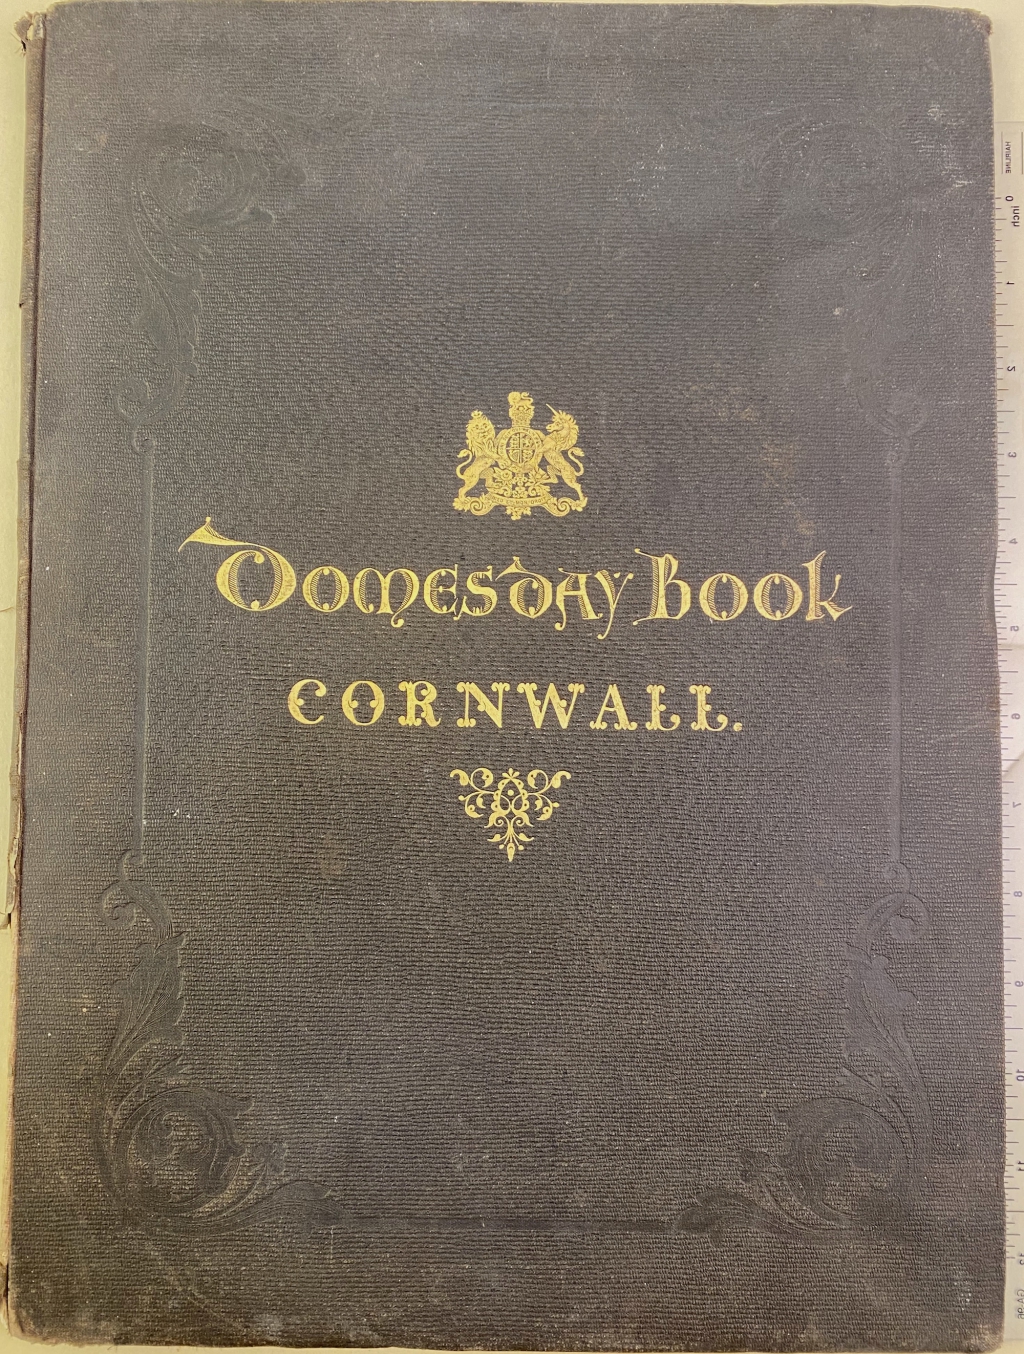 Upper cover of cloth binding on Domesday Book facsimile for Cornwall